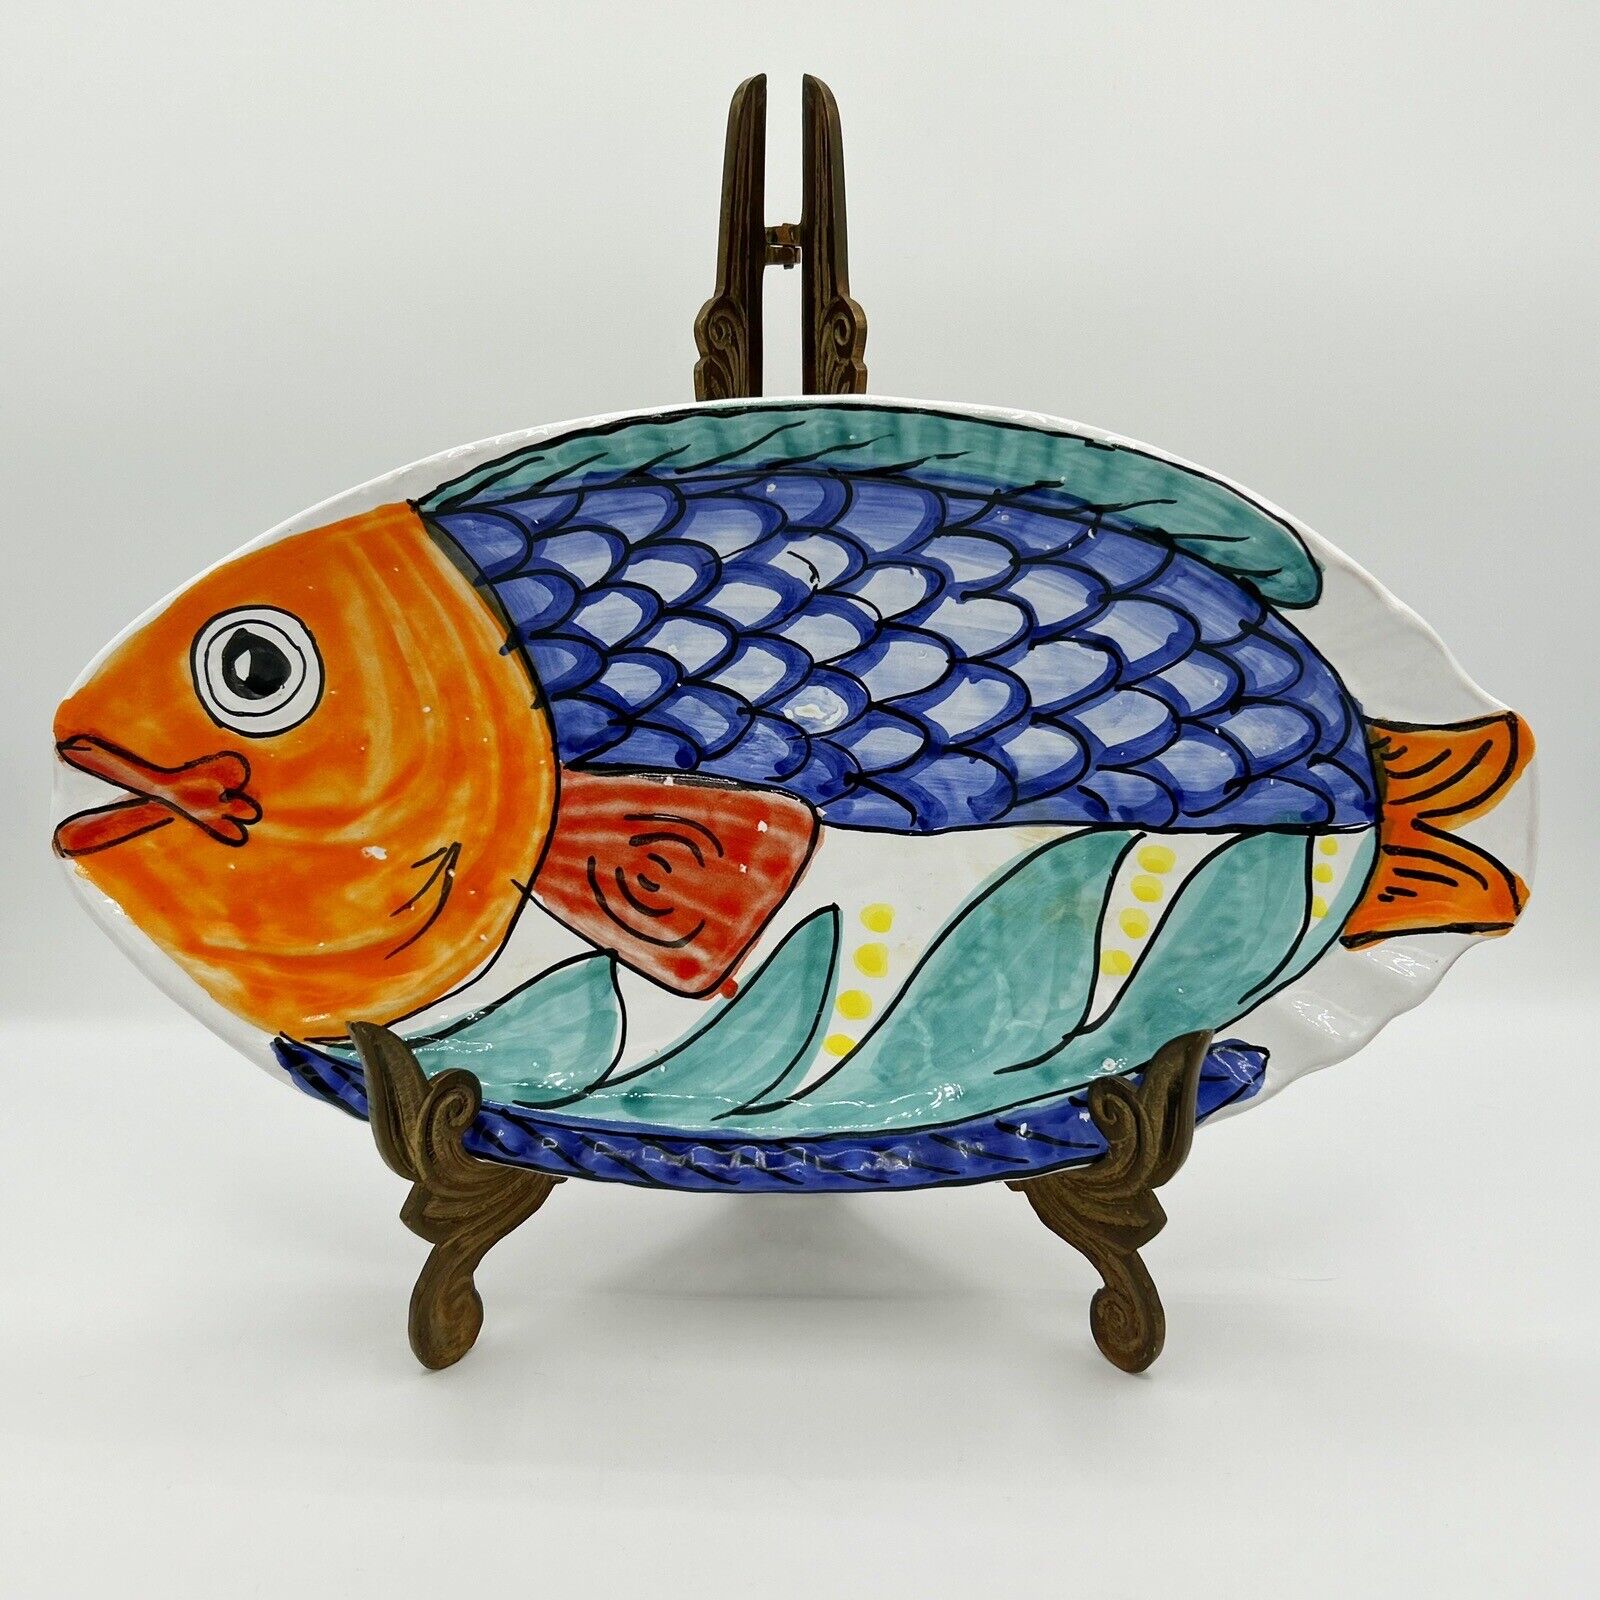 Art Pottery Fish Serving Platter Bright Vibrant Colors Hand Painted Red Clay